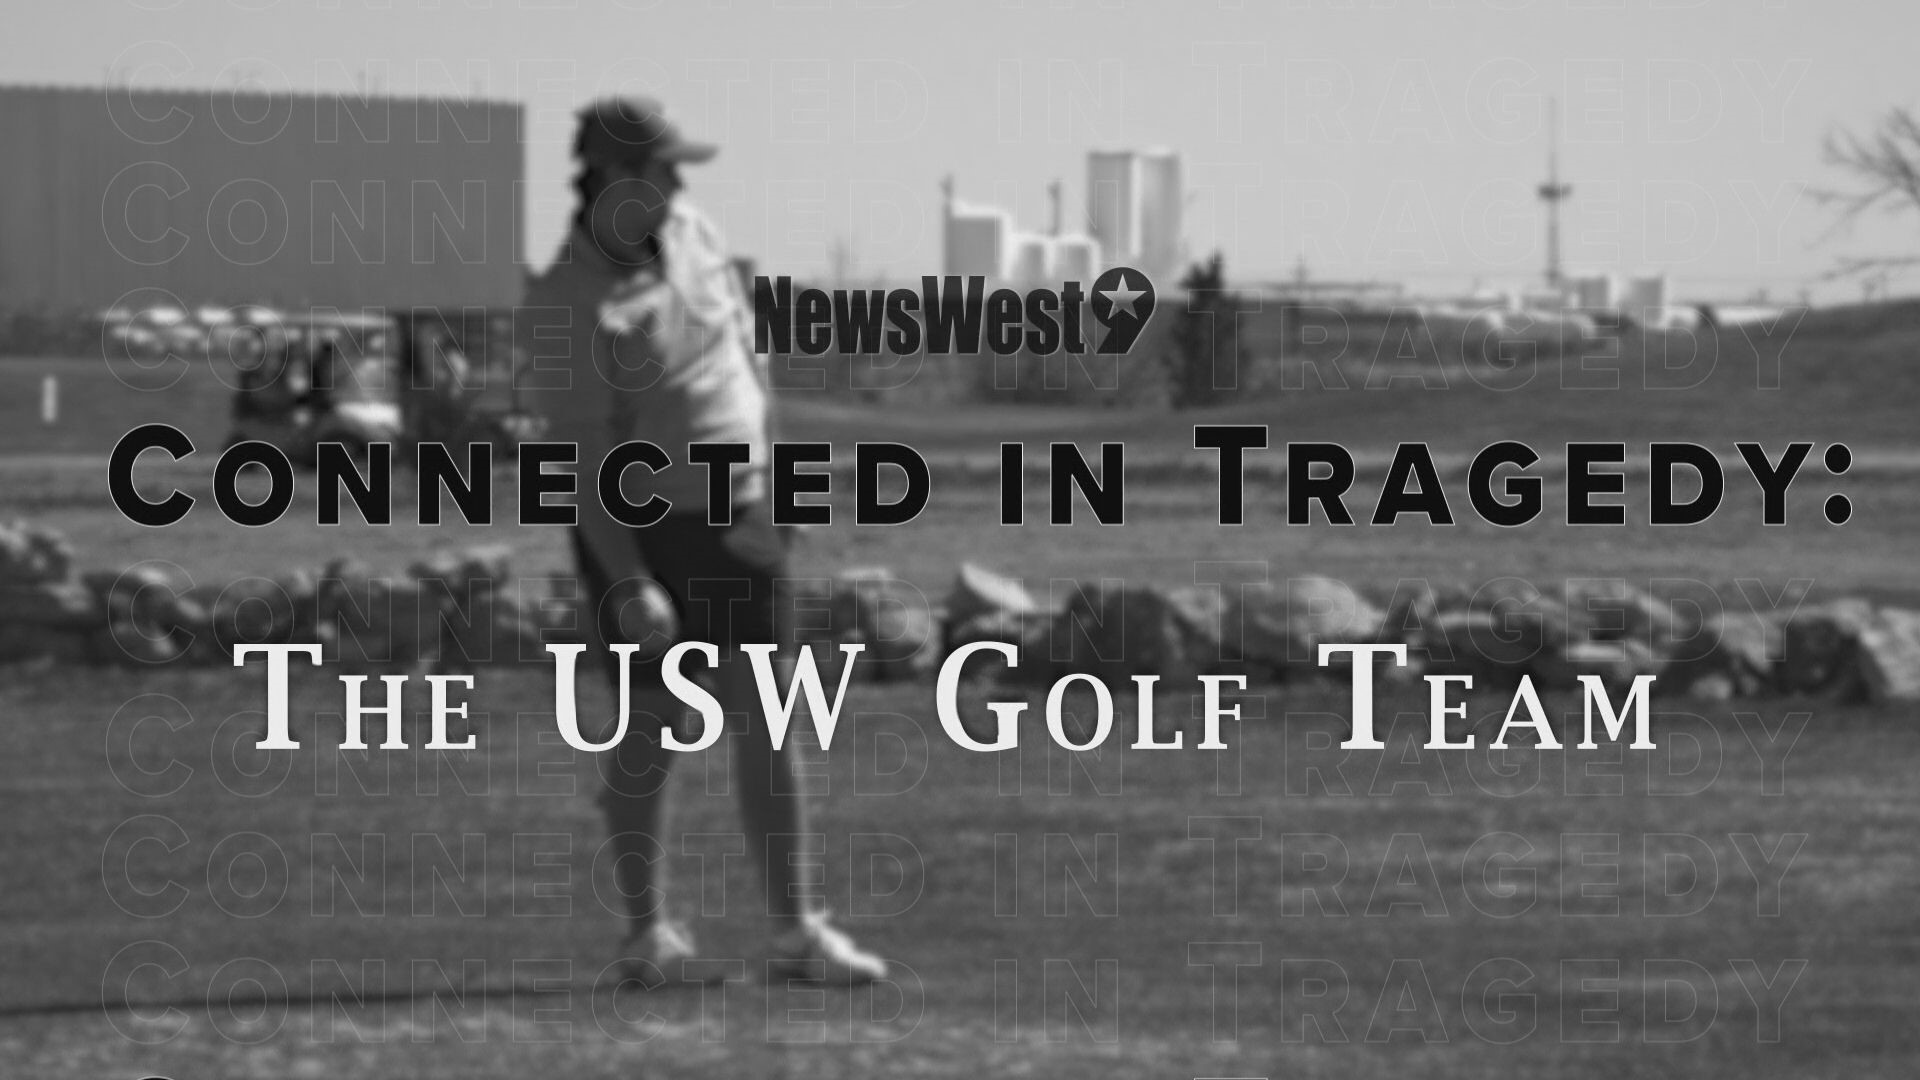 One year ago, a tragedy that shook the nation took the lives of six members of the USW golf team and their coach, along with a father and son.